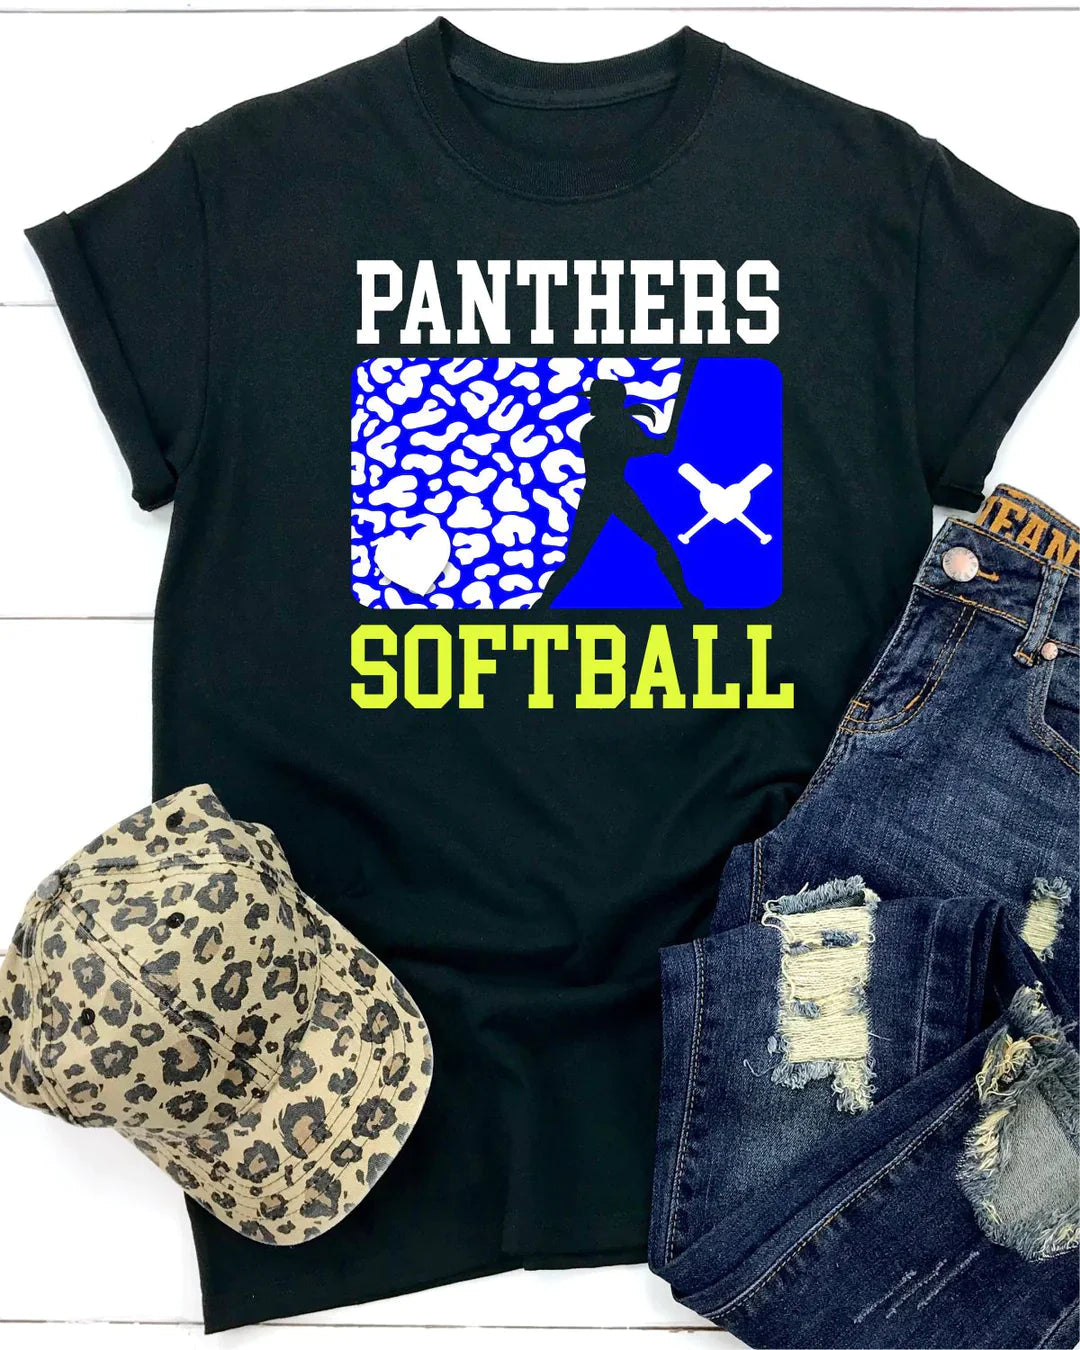 Panthers Softball - AnnRose Boutique